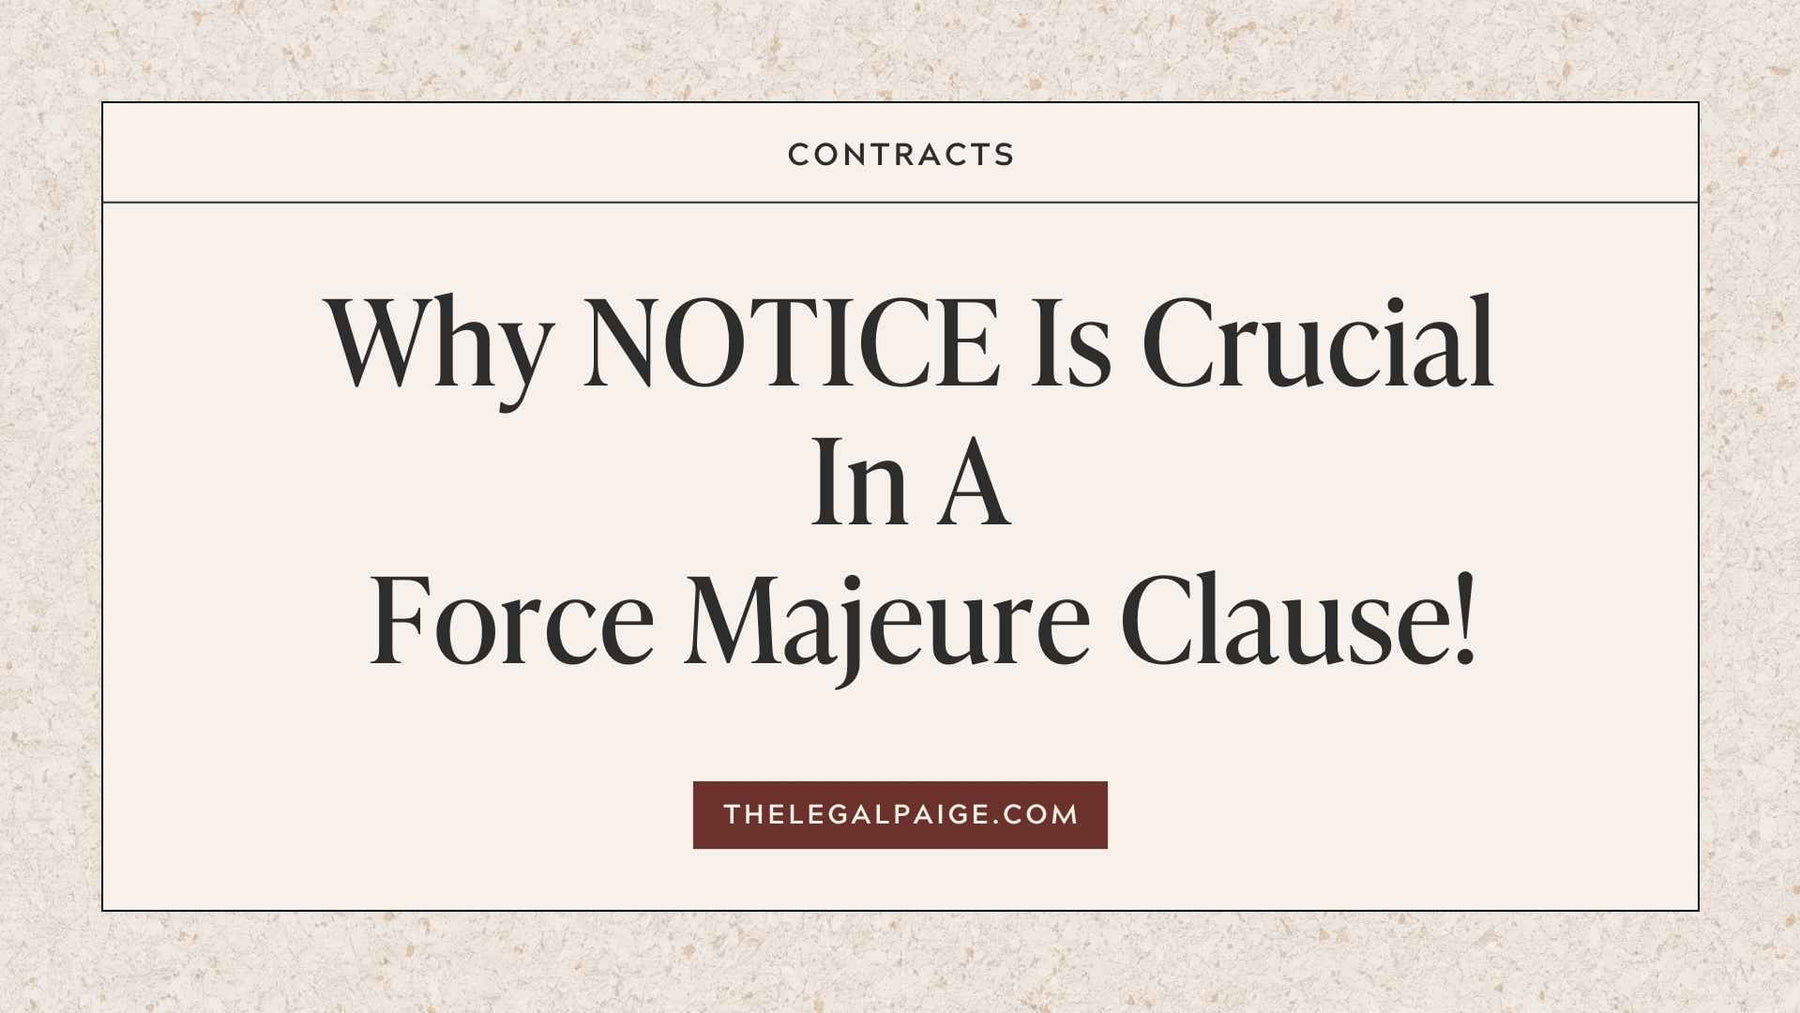 The Legal Paige - Why Notice is Crucial in a Force Majeure Clause!